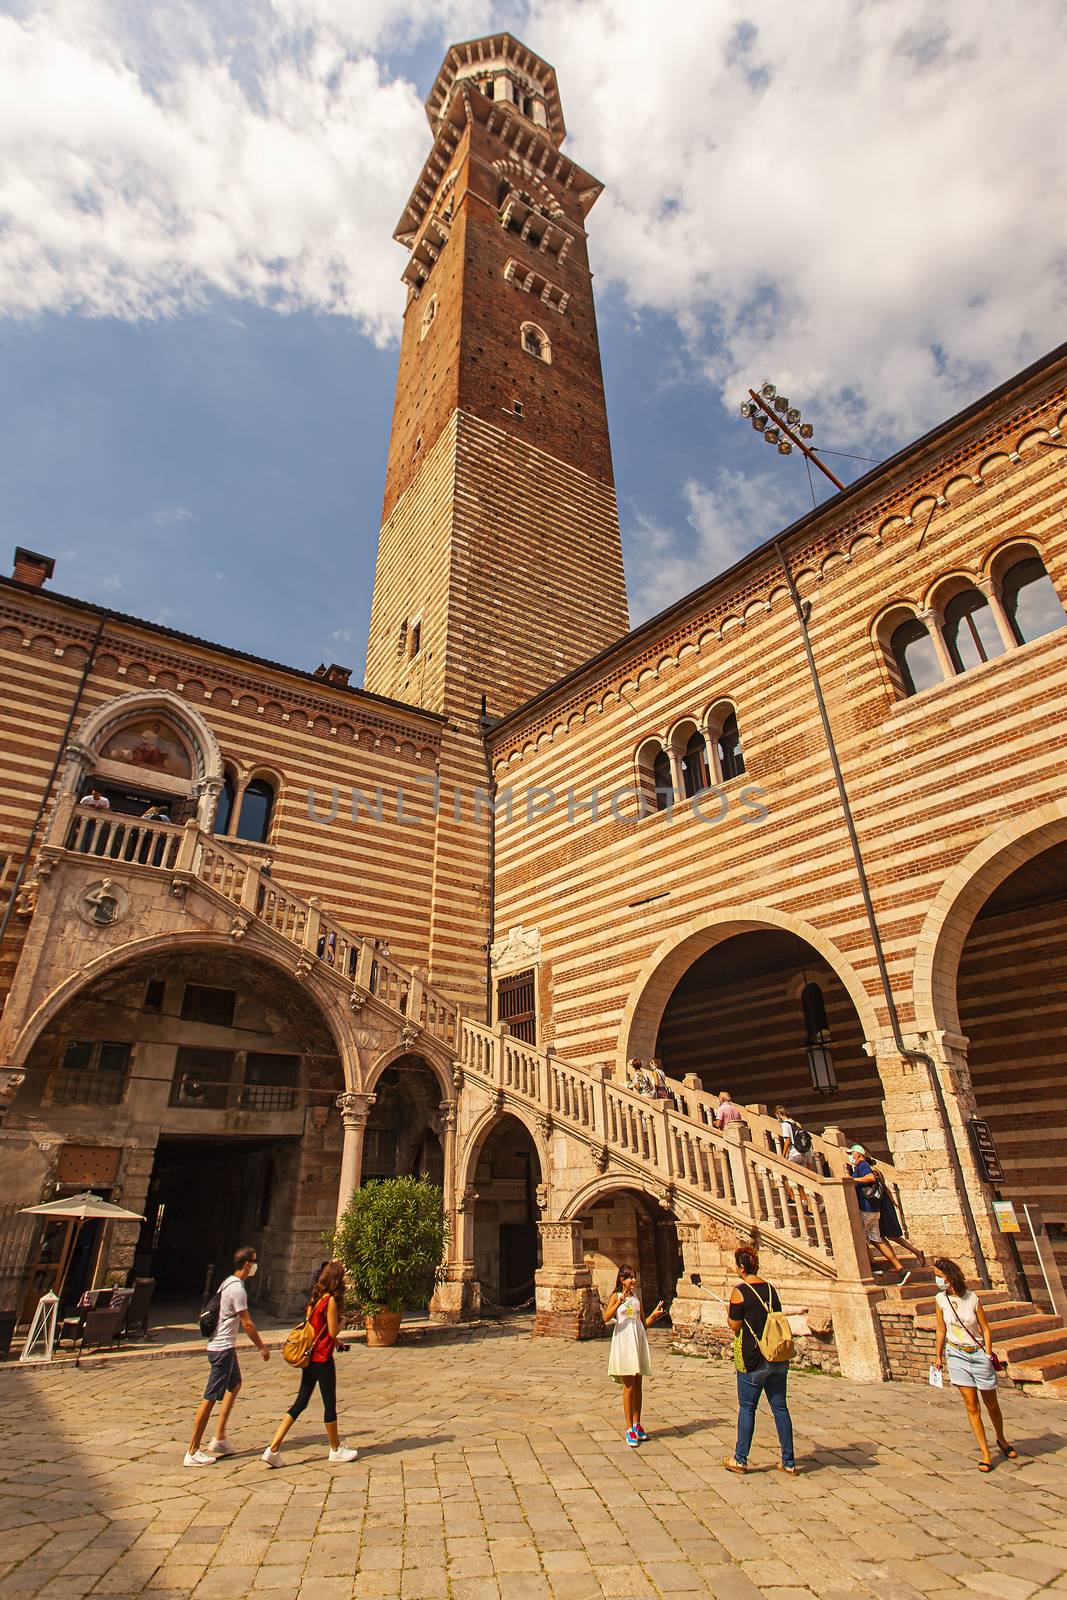 VERONA, ITALY 10 SEPTEMBER 2020: Regione Palace with staircase in Verona in Italy